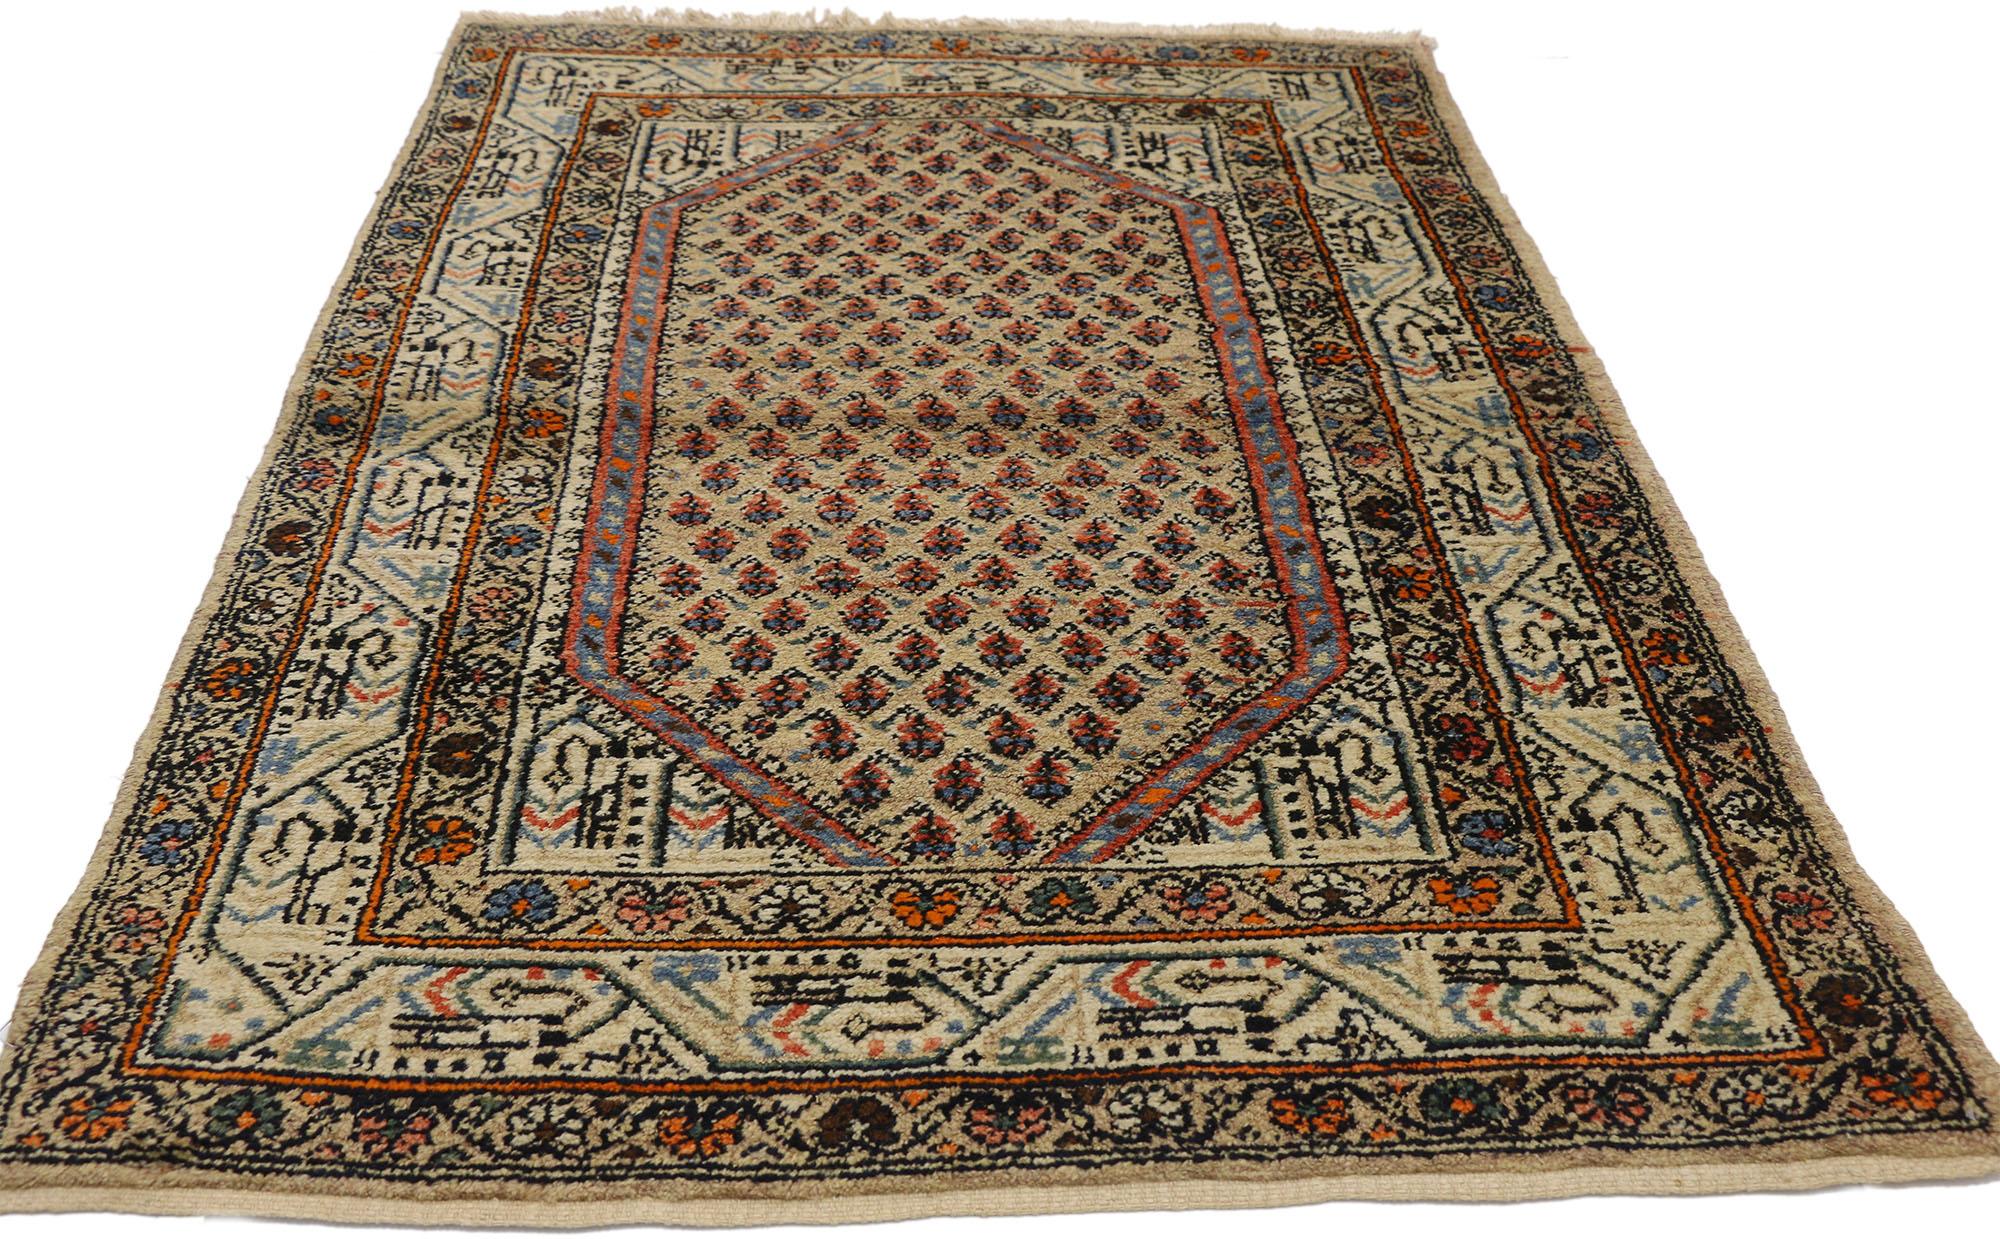 Antique Persian Saraband Rug with Mir Boteh Design In Good Condition For Sale In Dallas, TX